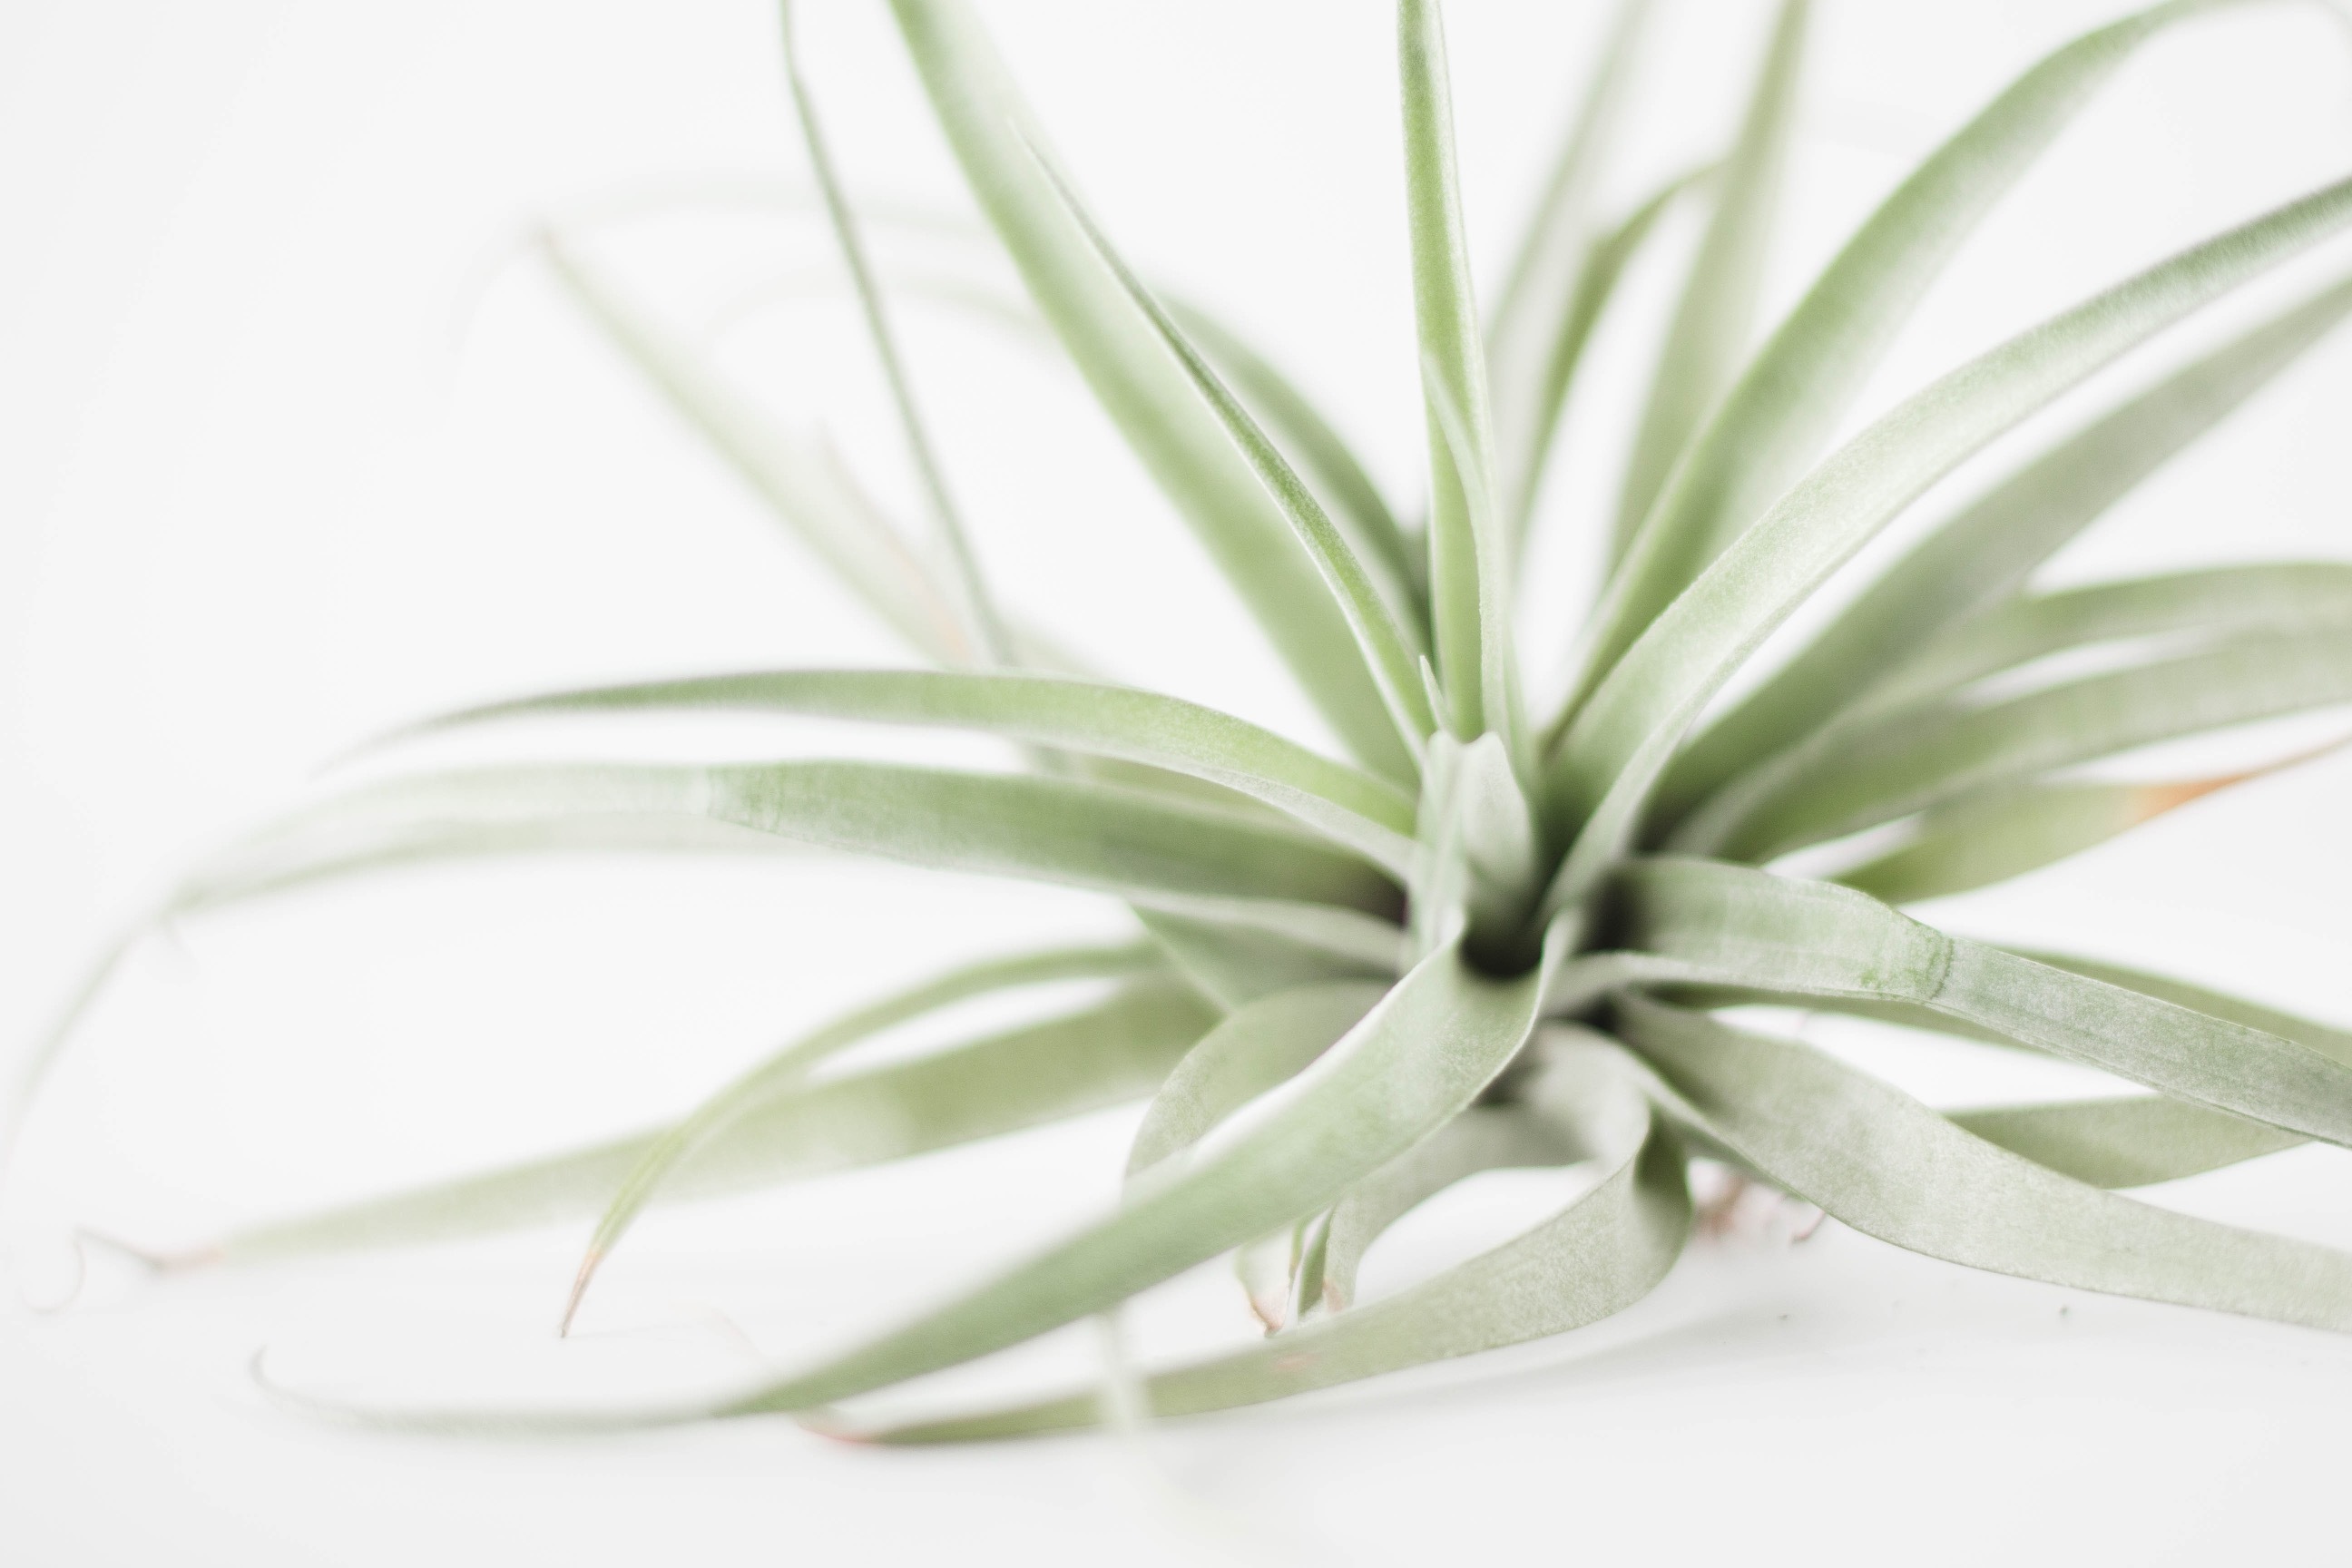 Tillandsia is a pet-friendly non-toxic air plant with long, pale green leaves.